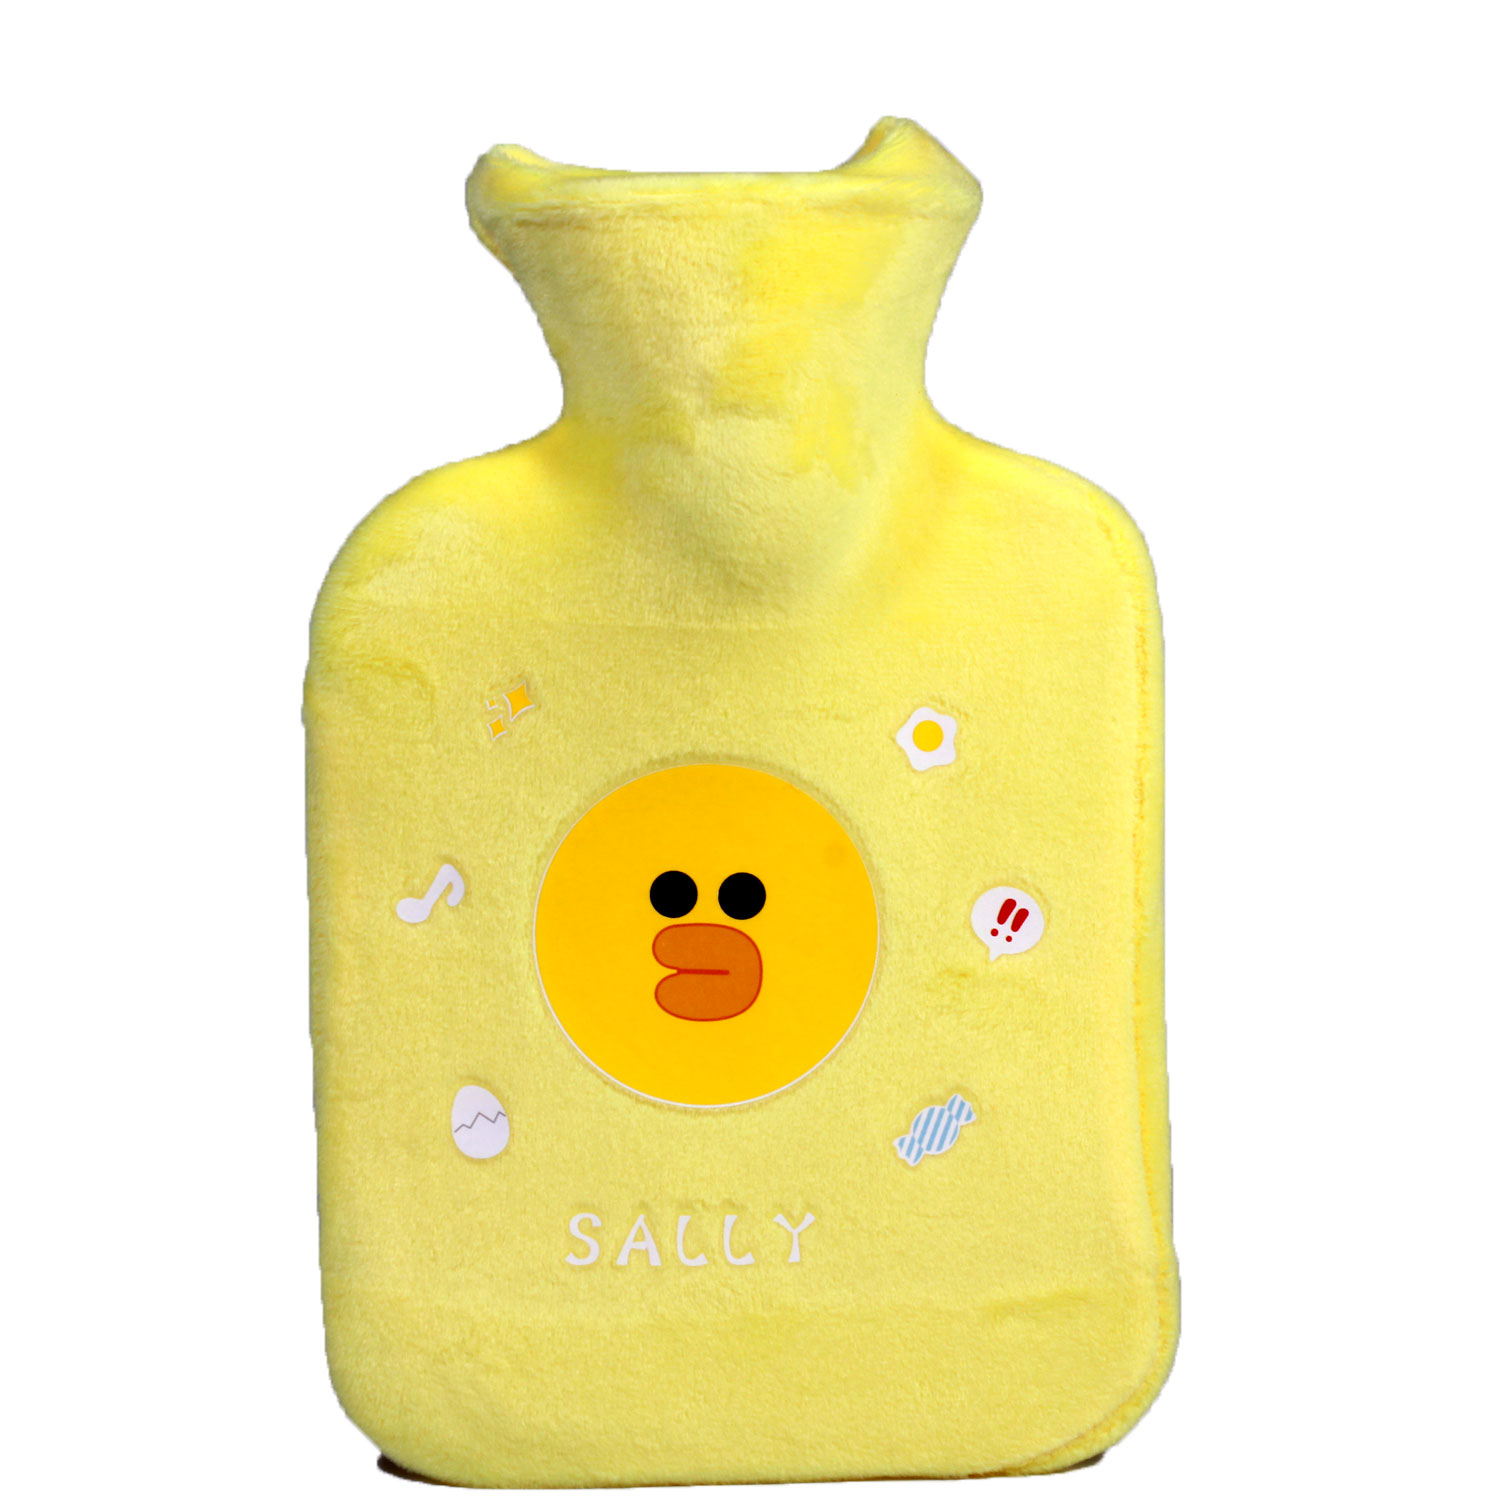 https://tinibees.com/wp-content/uploads/2019/11/tinibees-babyhotwaterbag-T501-2A.jpg